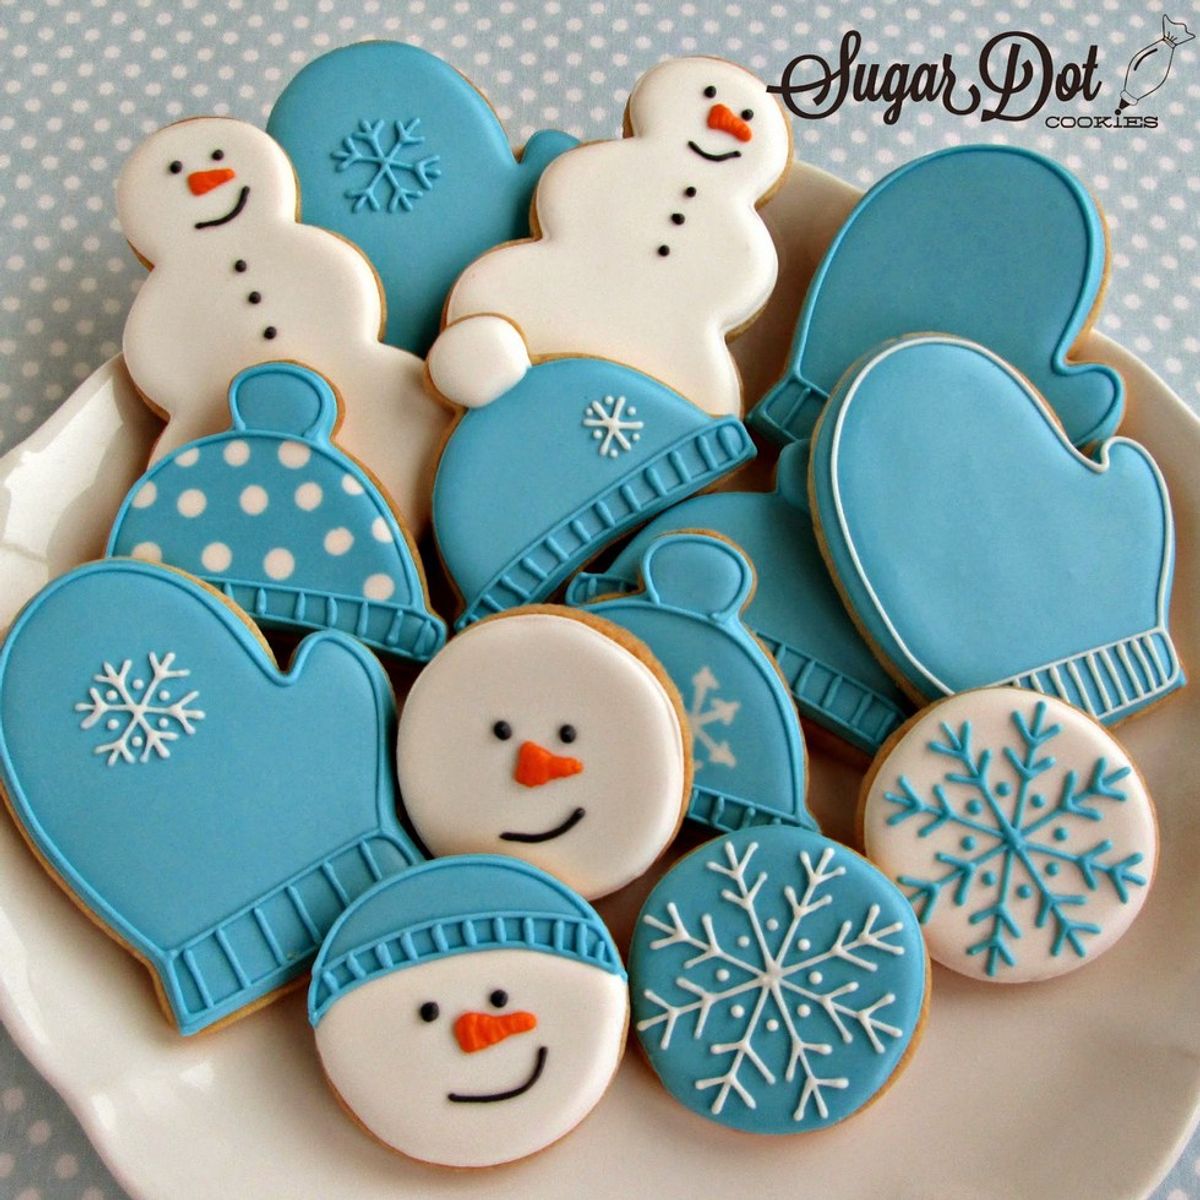 Here's How To Make The Easiest And Most Delicious Sugar Cookie Recipe Ever